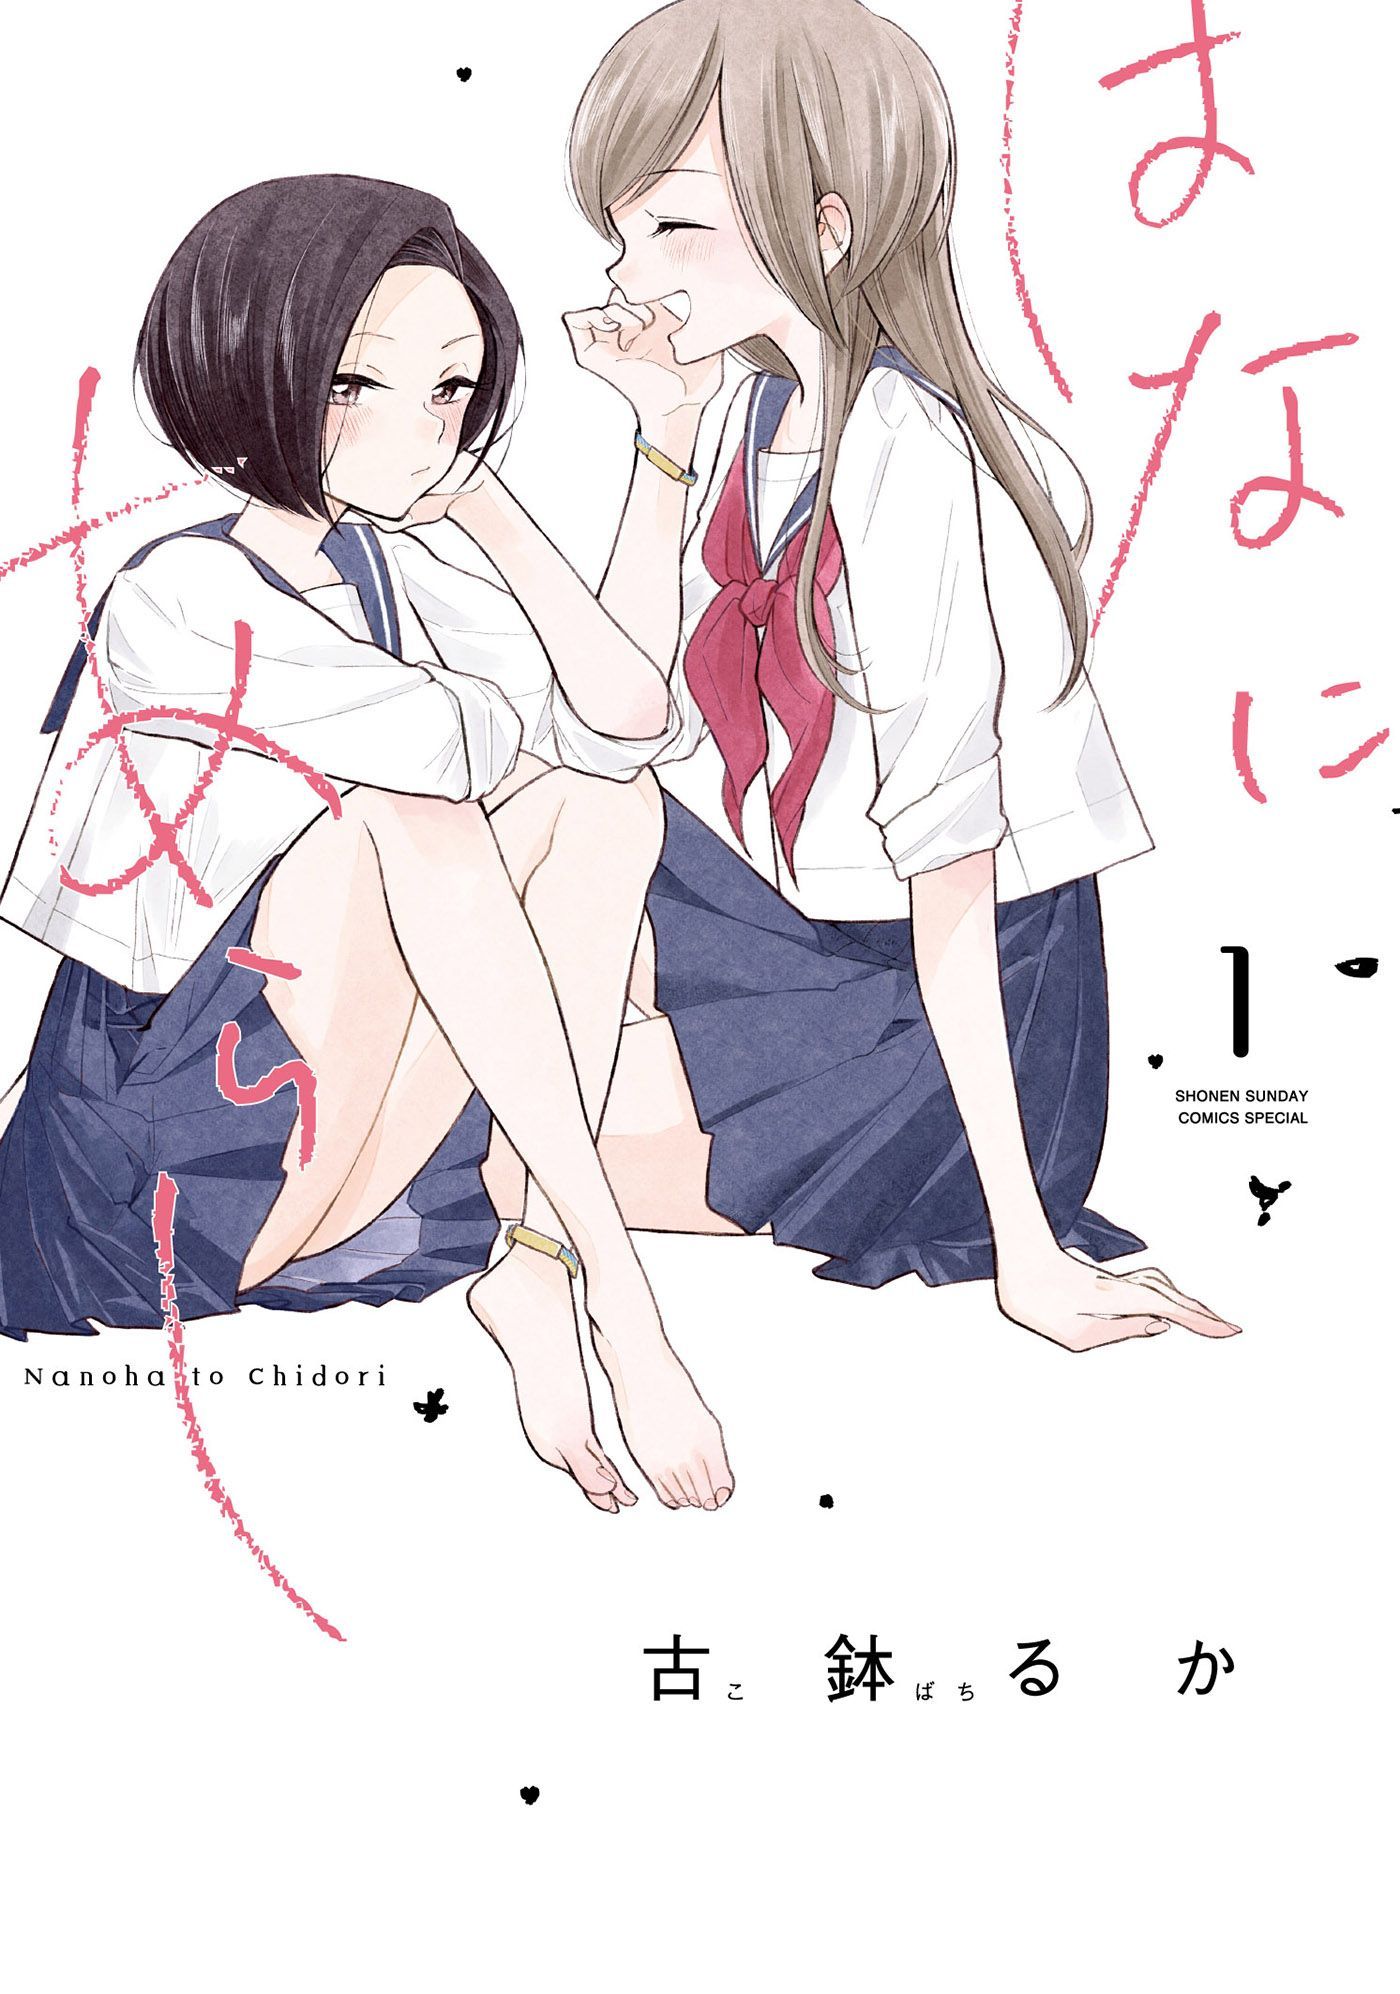 rainbow after storms manga volume one cover